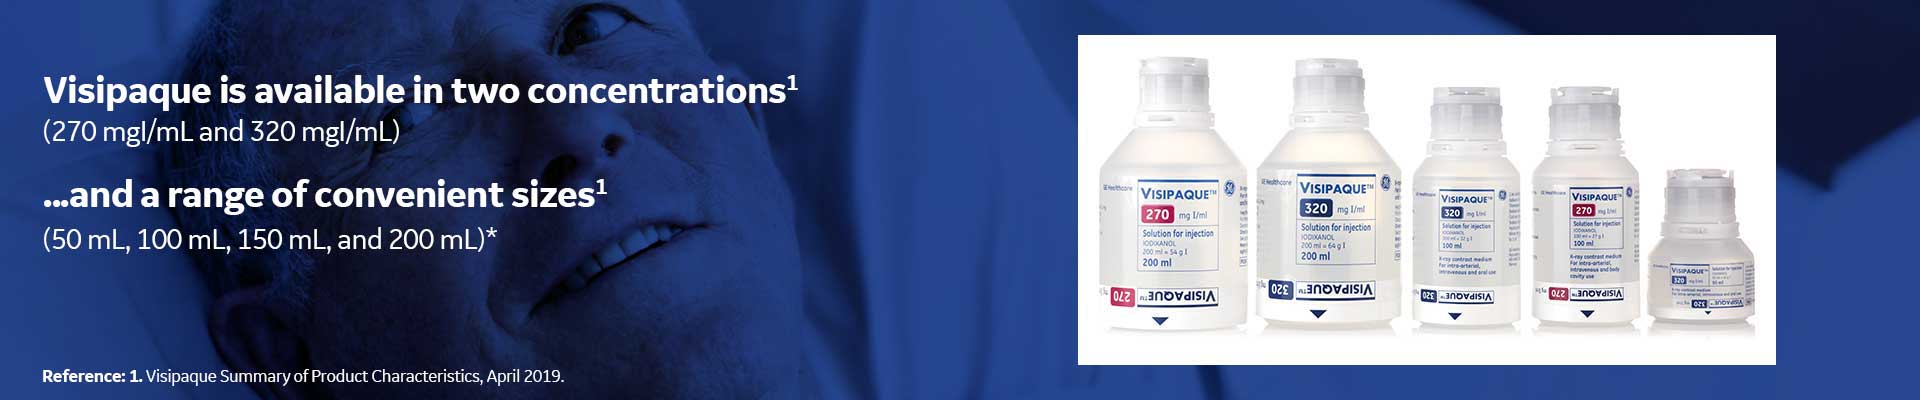 Visipaque is available in two concentrations1